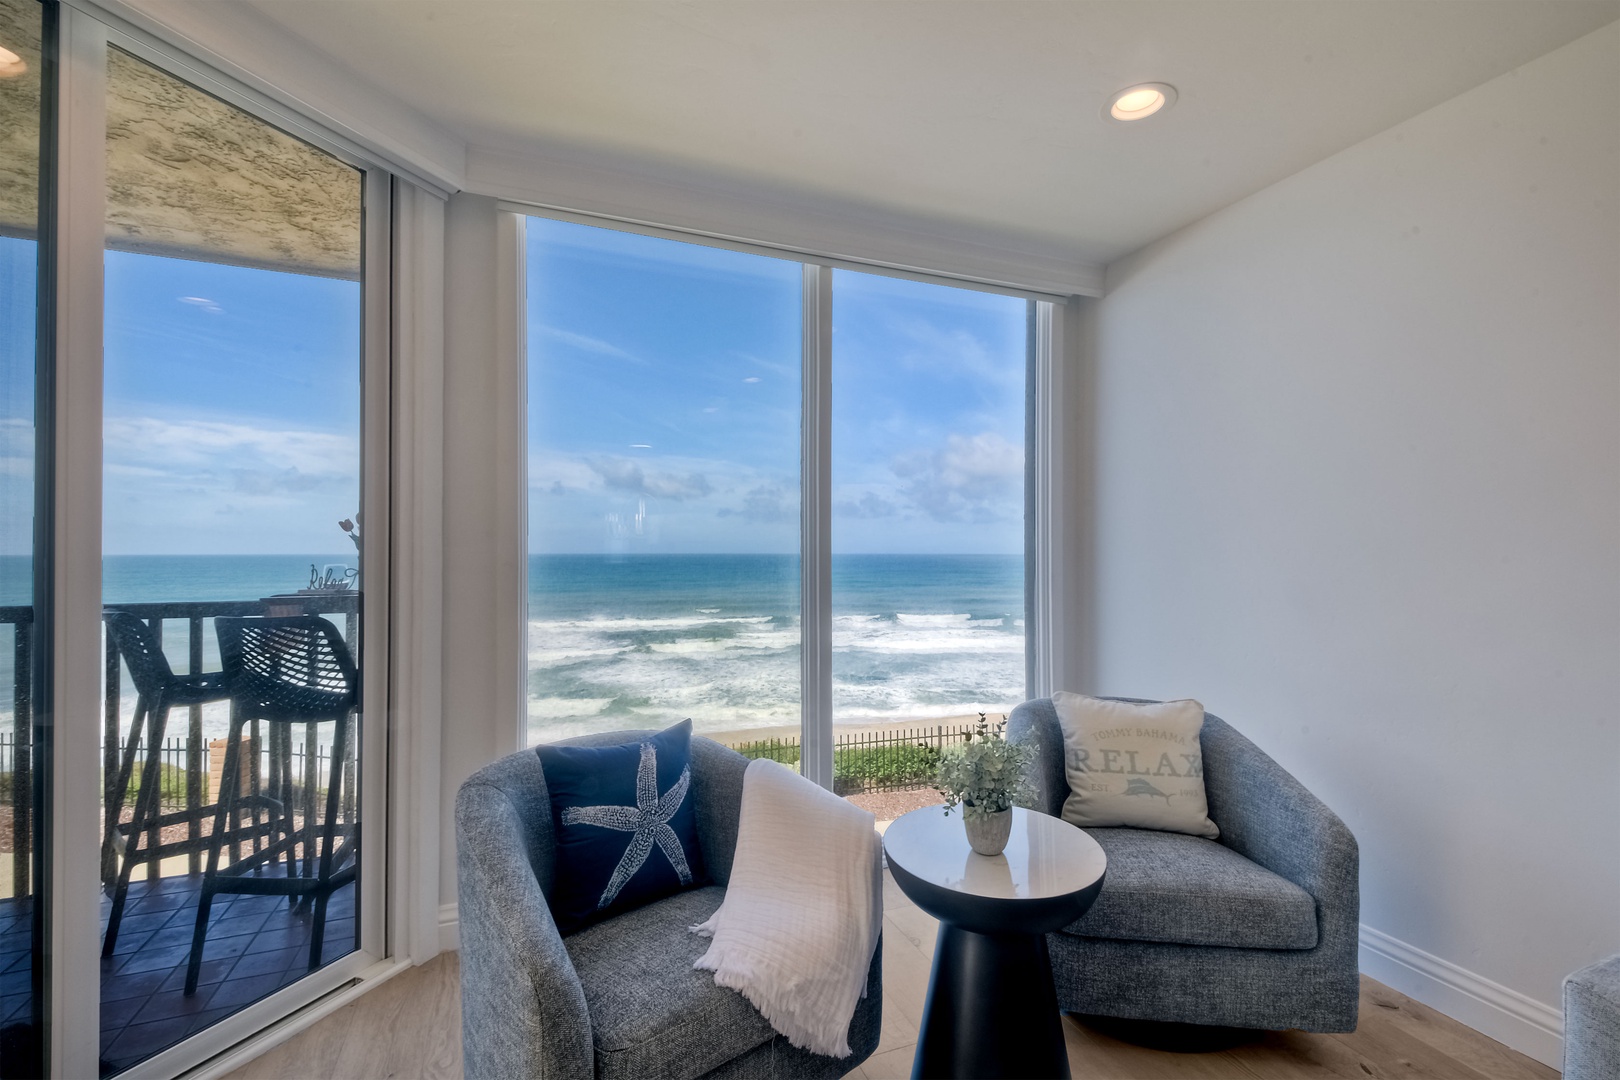 Curl up in the breezy living room & enjoy streaming with a stunning view